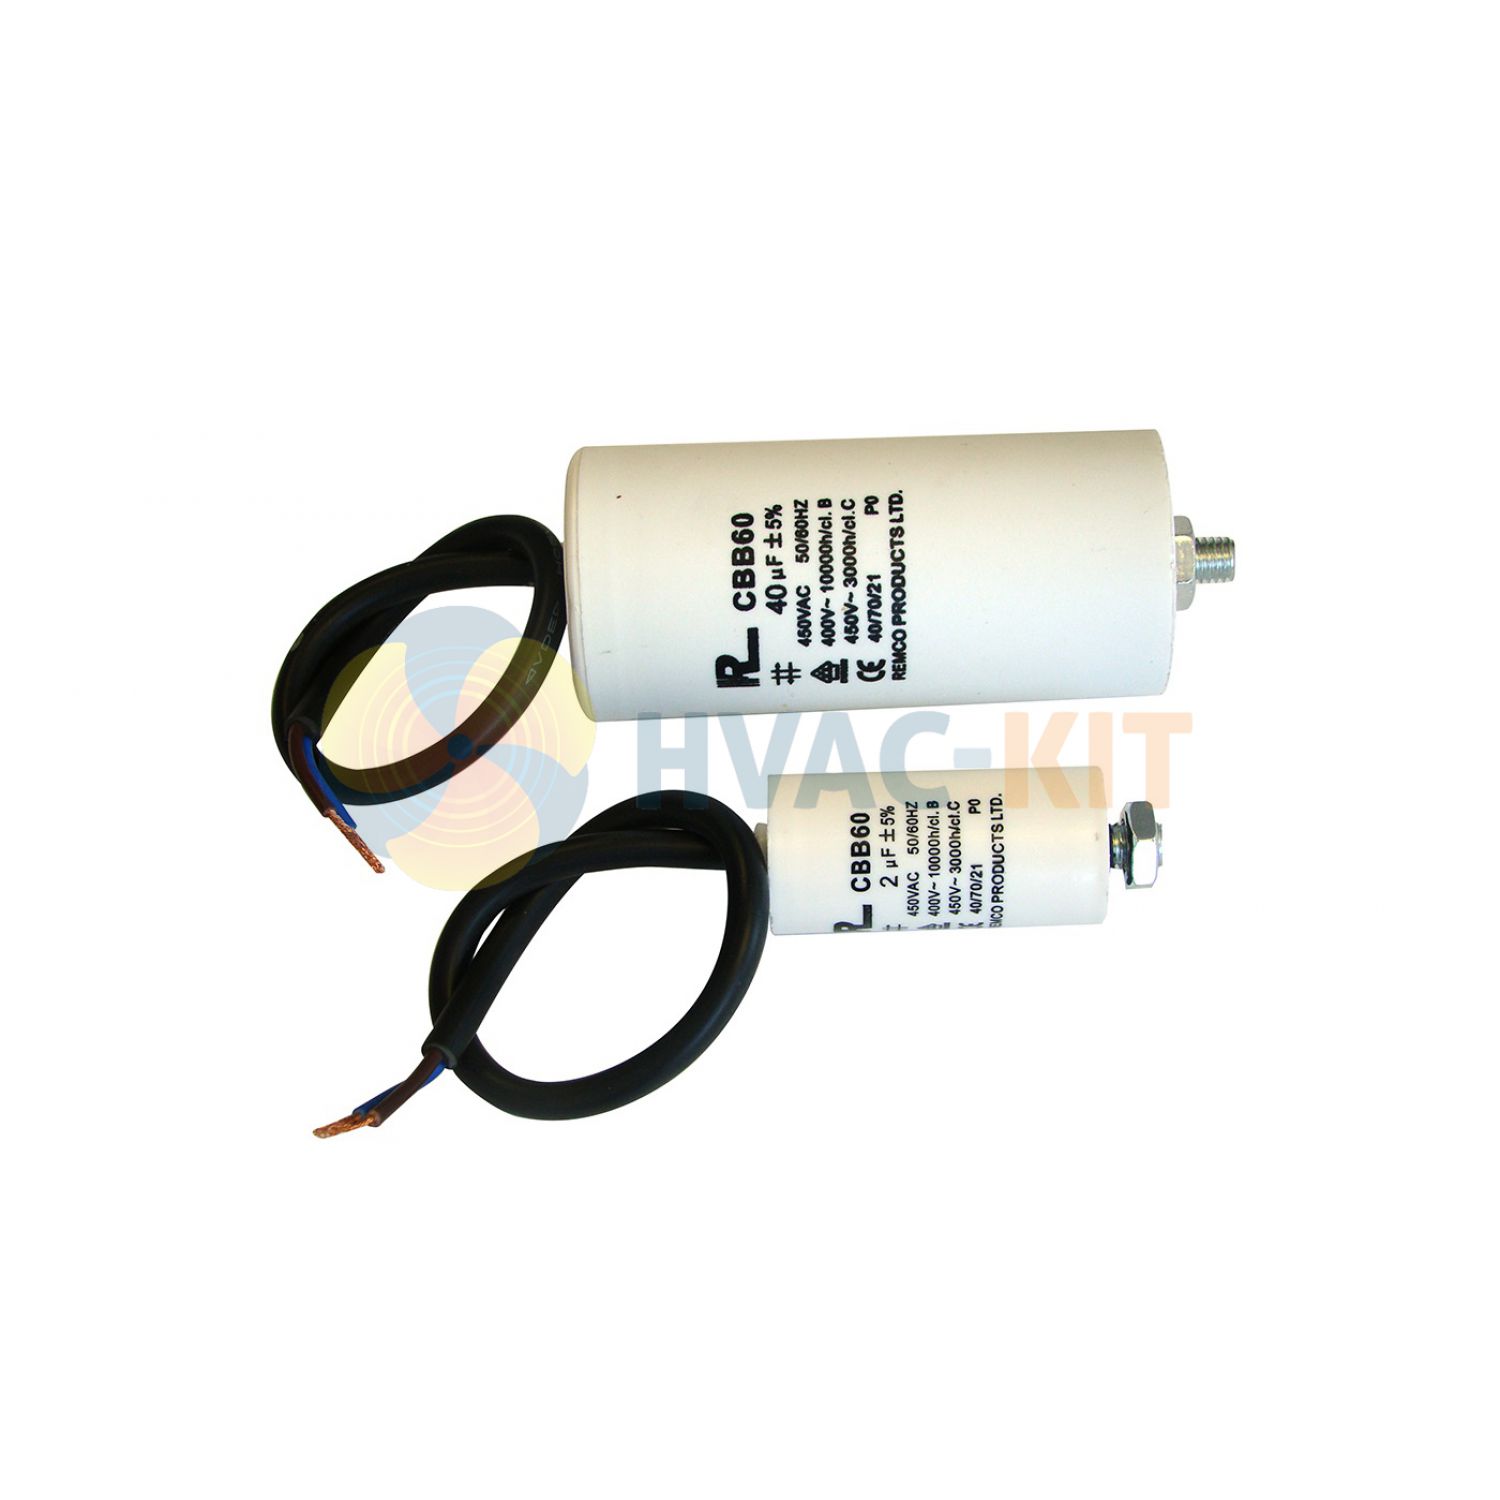 2 MFD Run Capacitor With leads